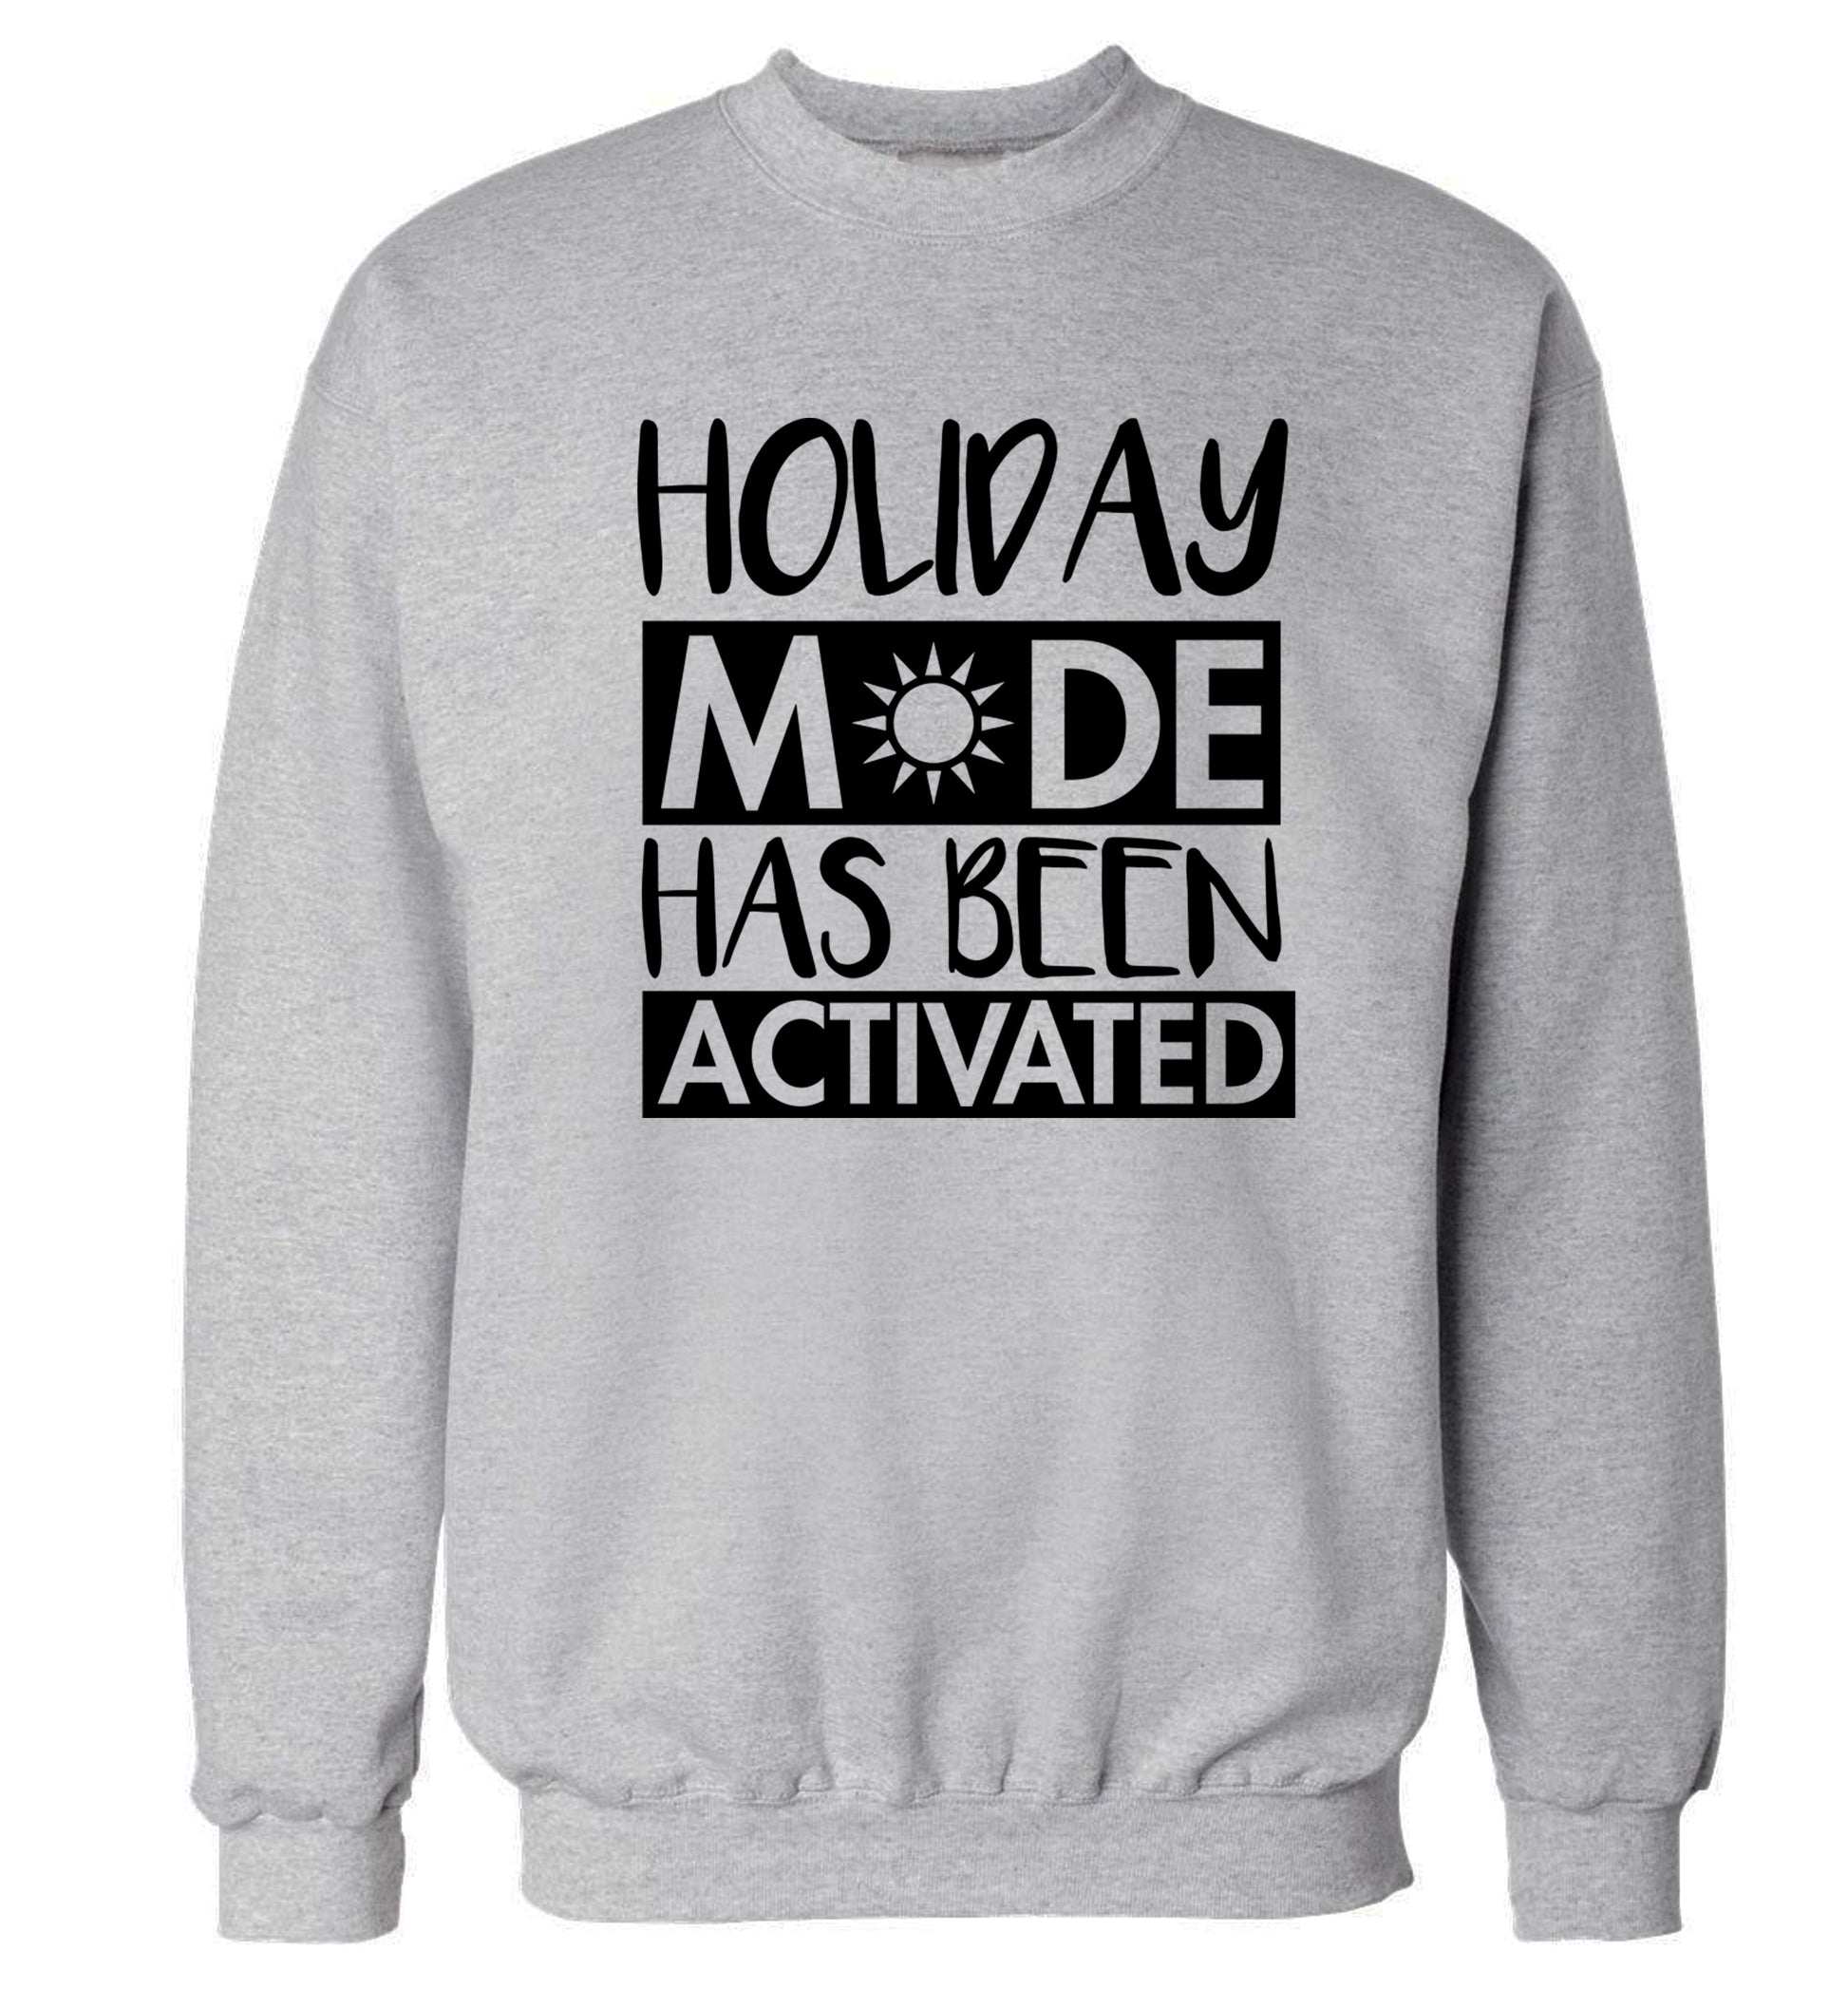 Holiday mode has been activated Adult's unisex grey Sweater 2XL